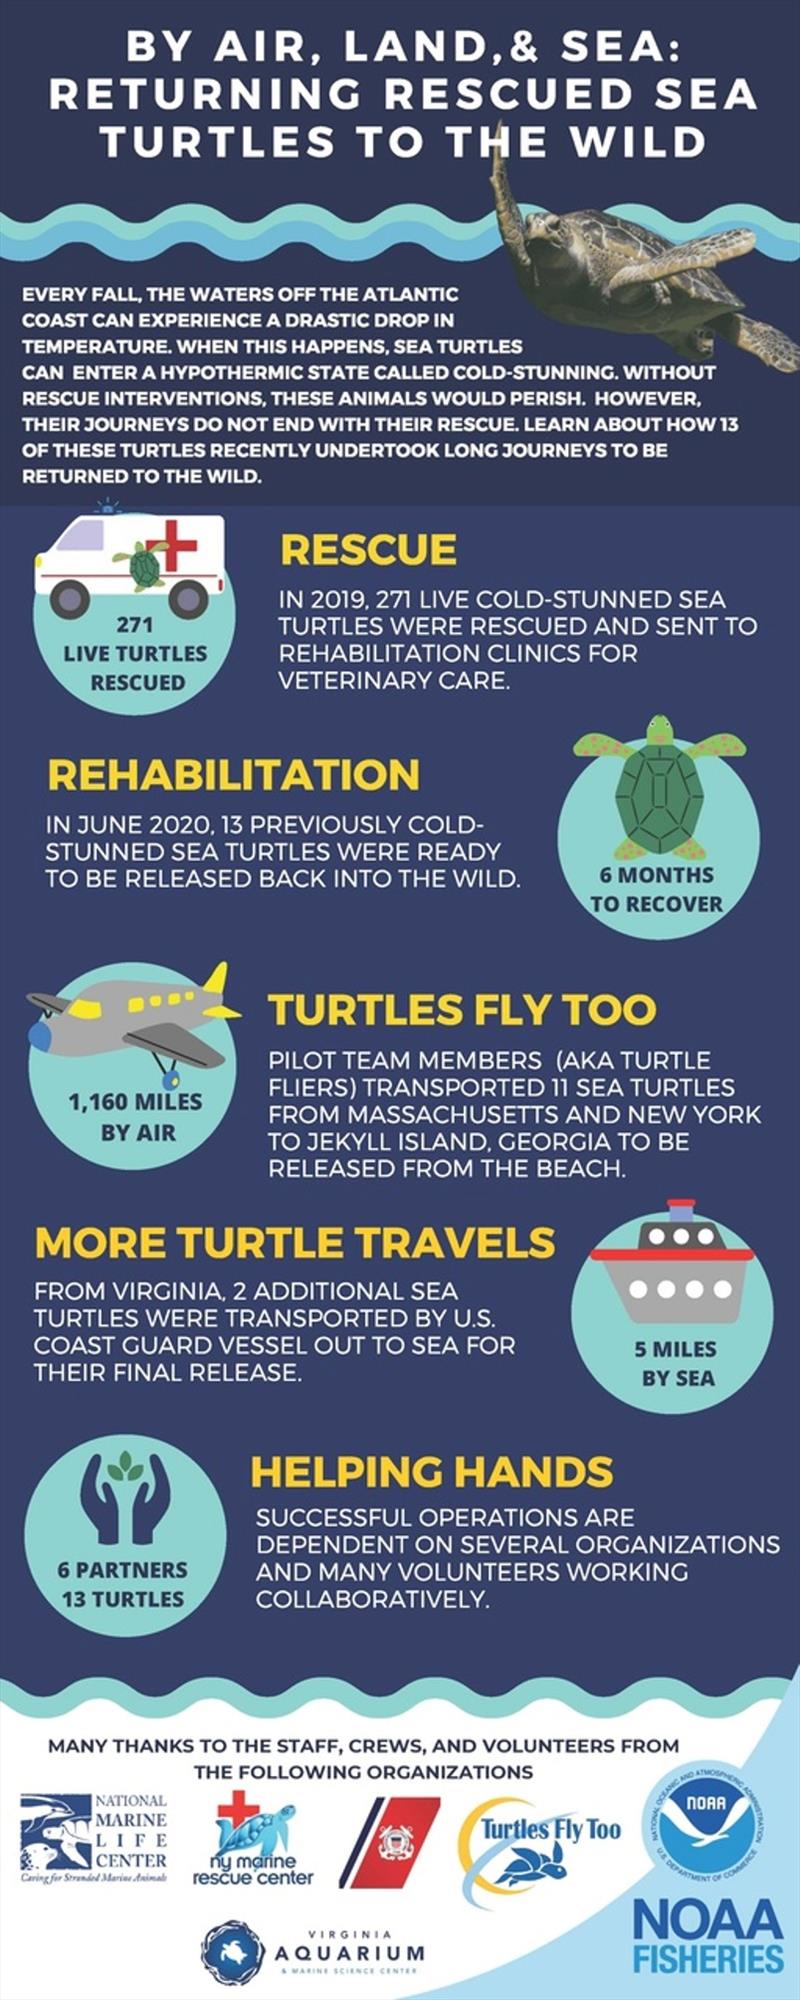 Returning rescued sea turtles to the wild by land, air, and sea - photo © NOAA Fisheries